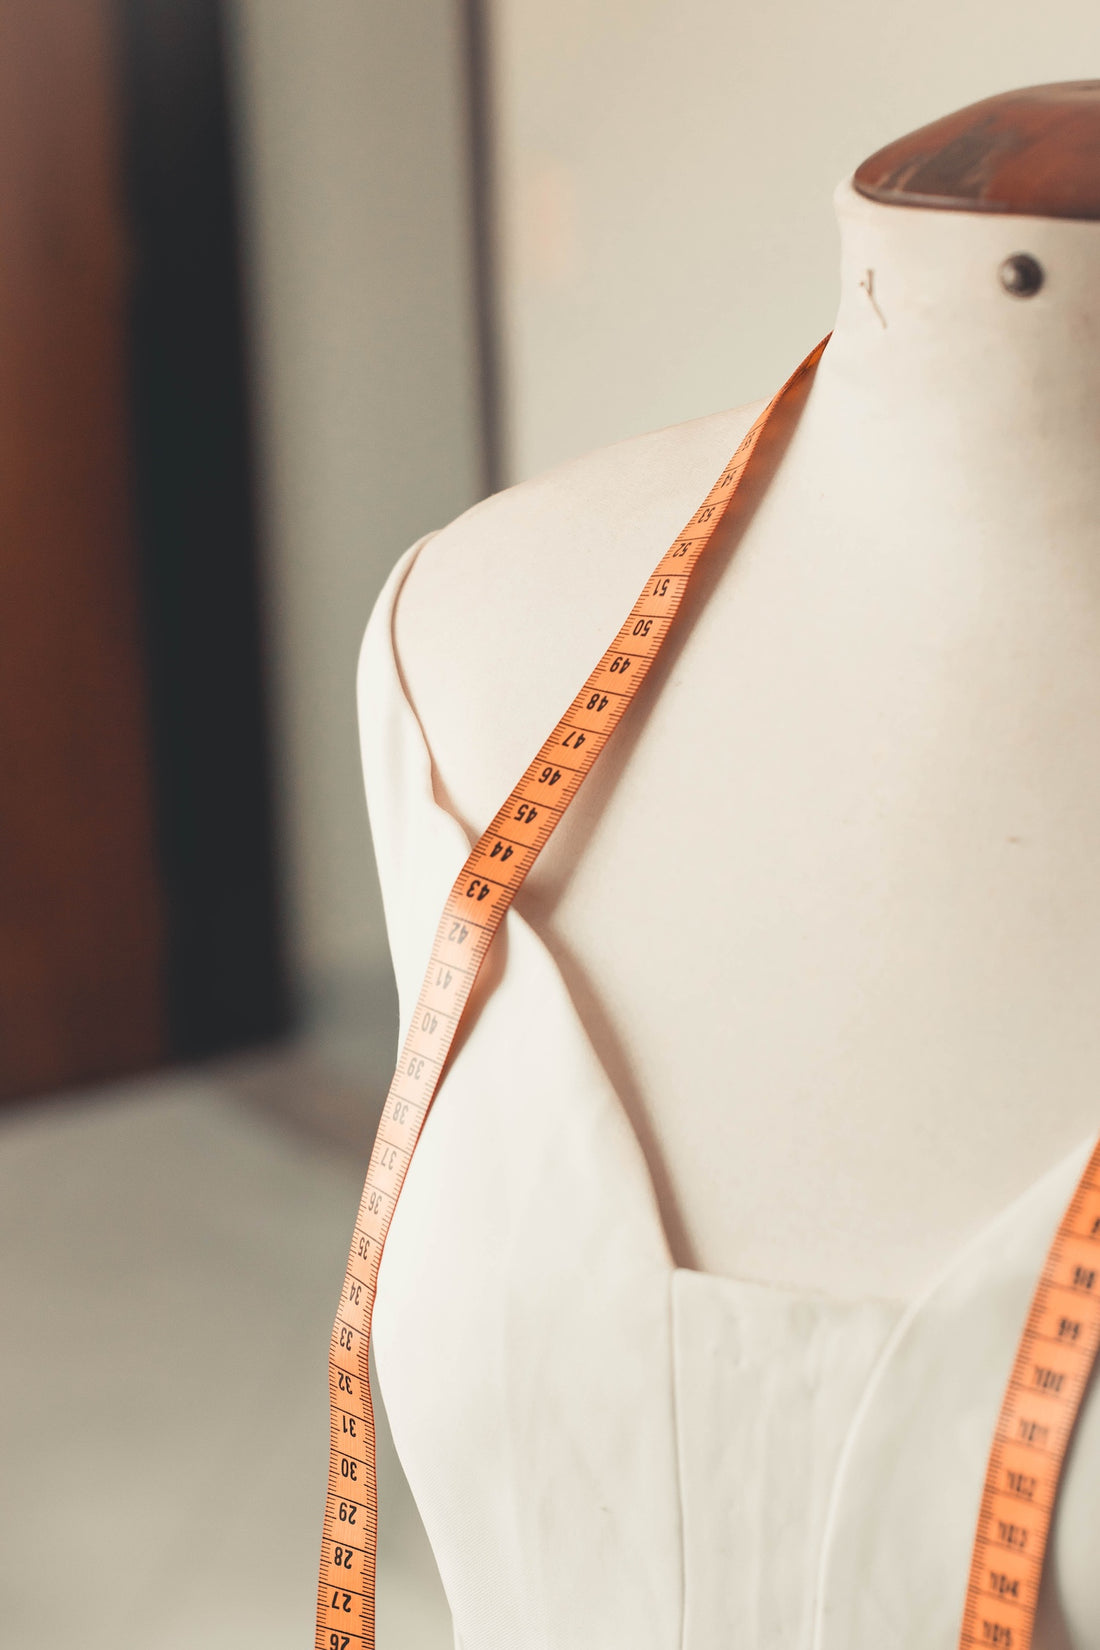 Crafting Your Capsule Wardrobe: Tips for Building a Sustainable Wardrobe with Handmade Pieces